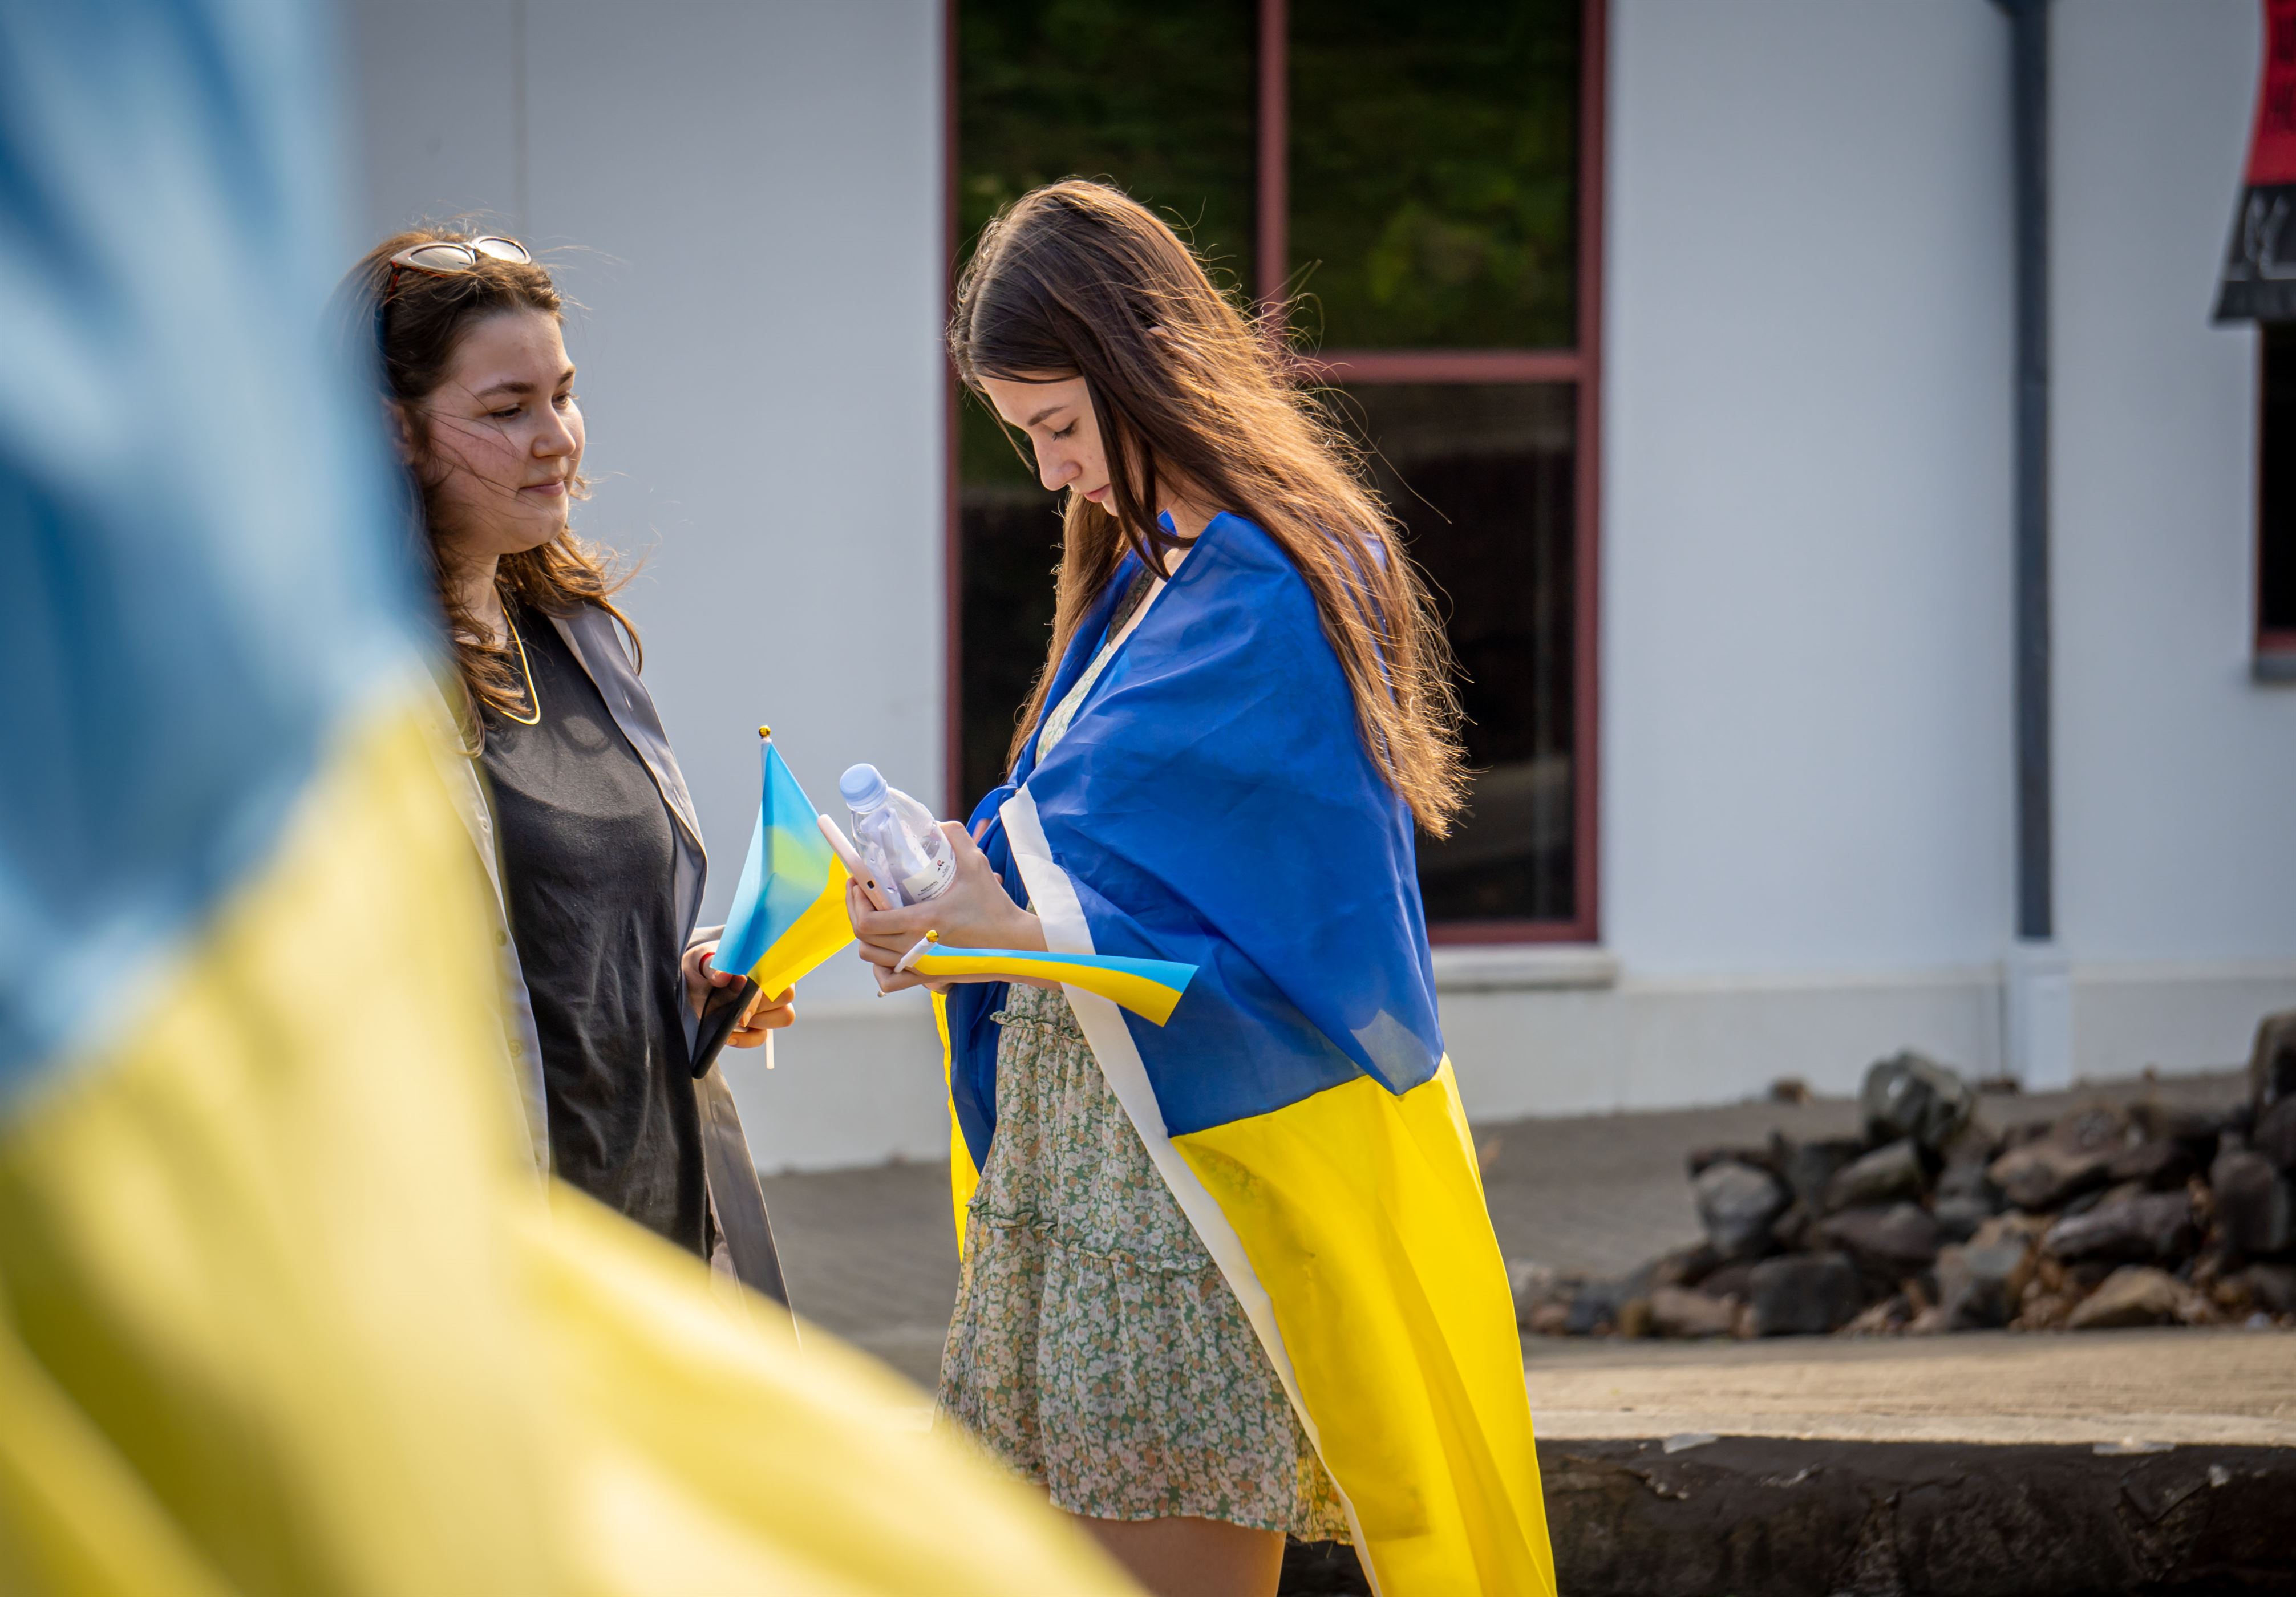 Liz Chernyshova, a psychology major and Russian minor, prays for Ukraine while wearing the countires flag. Lynise Olivacce | The Montclarion